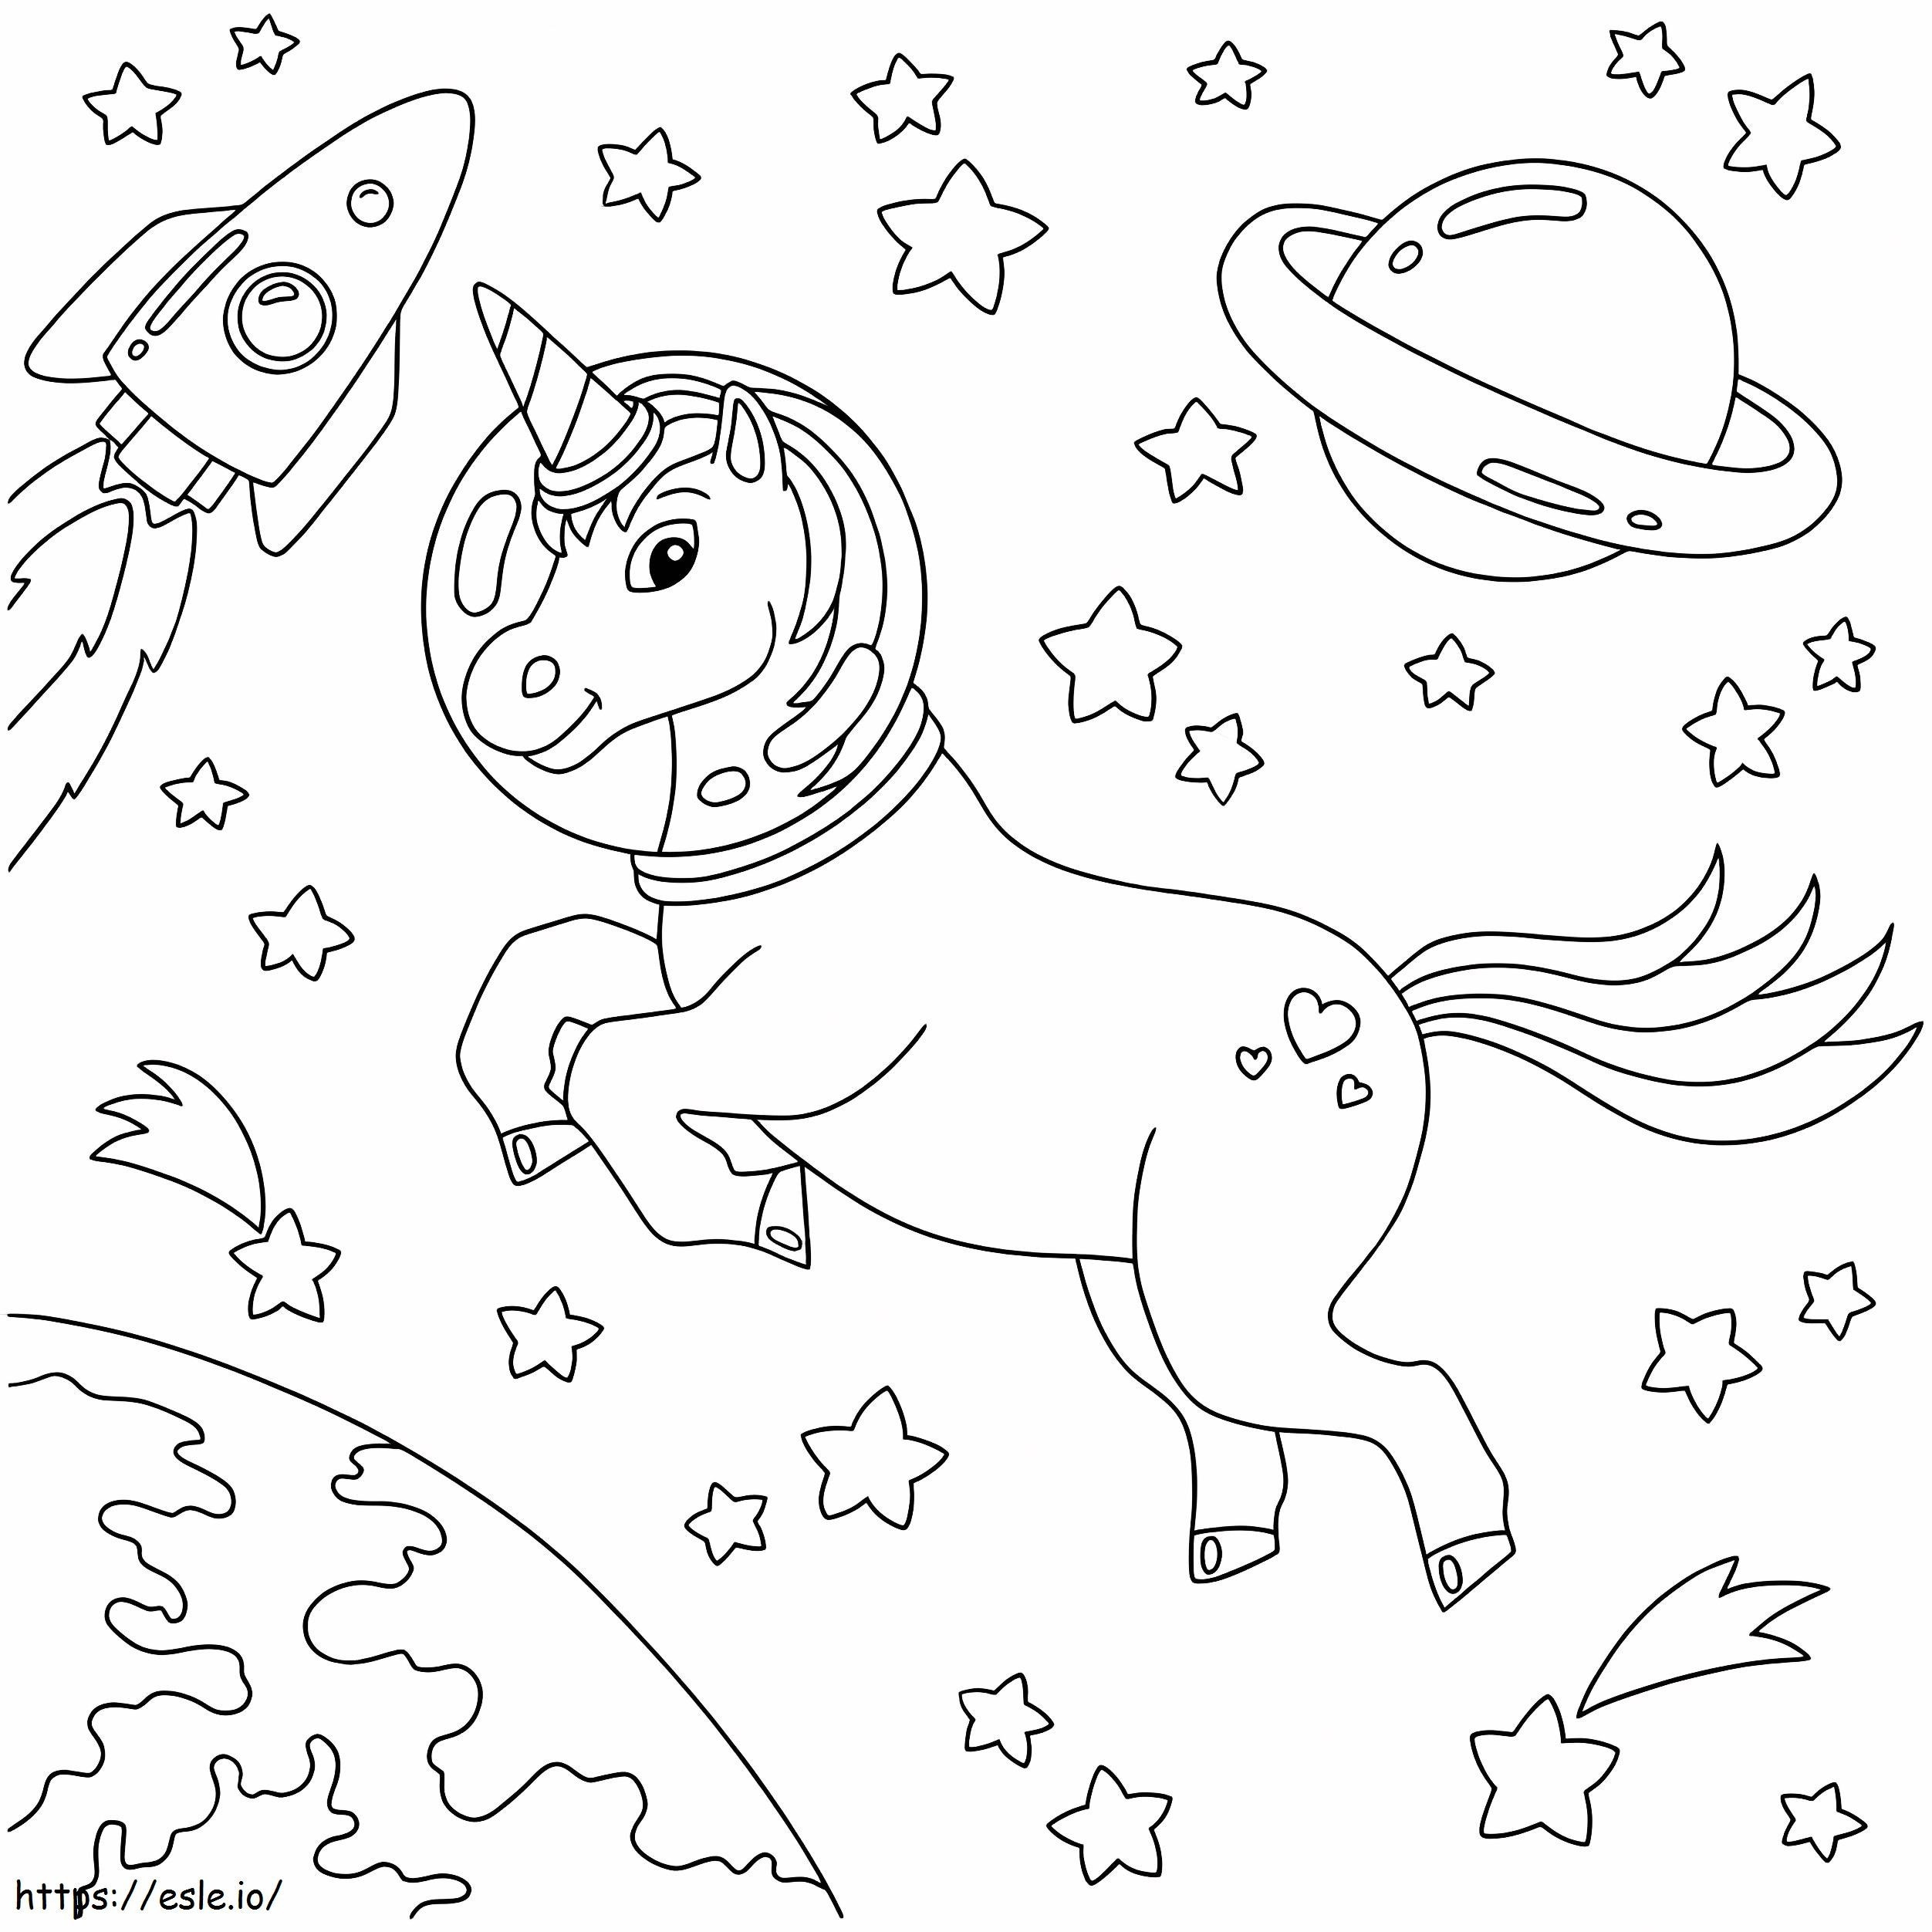 Unicorn Outer Space coloring page